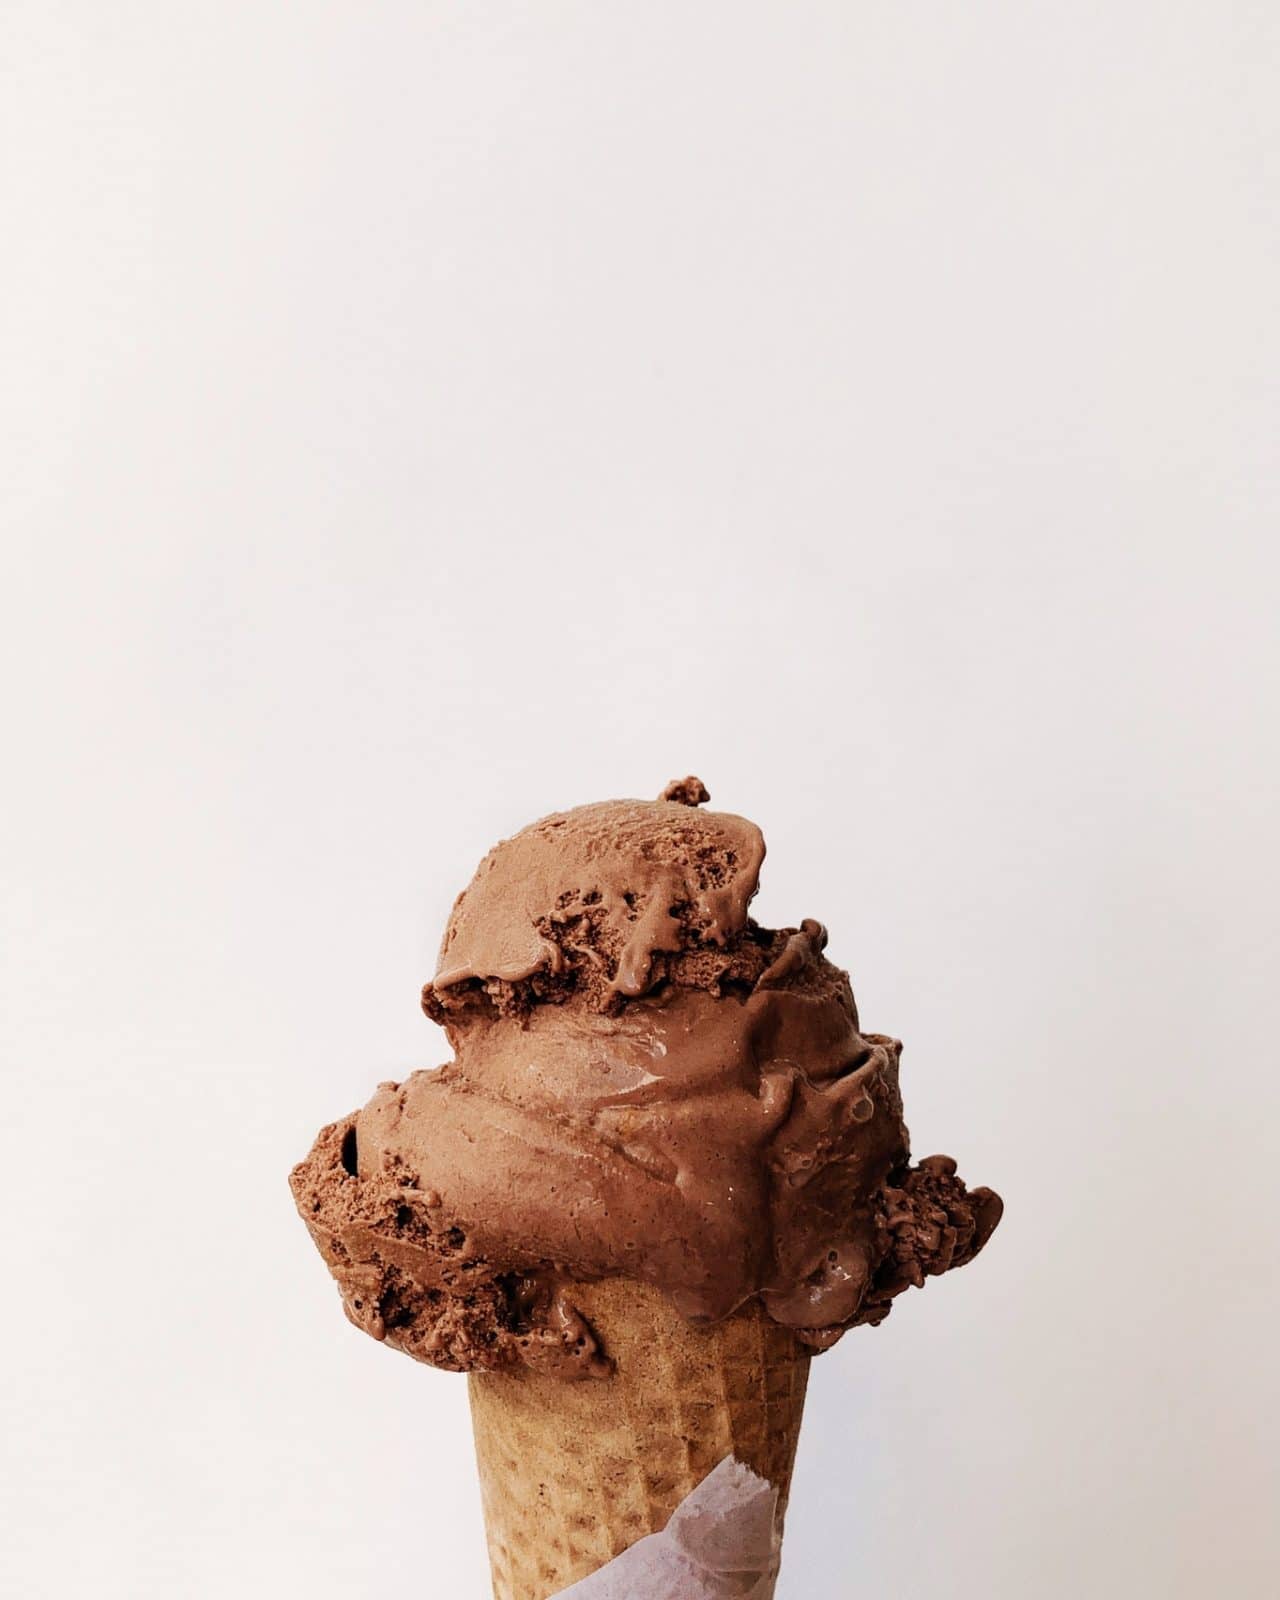 A scoop of chocolate ice cream on a cone.